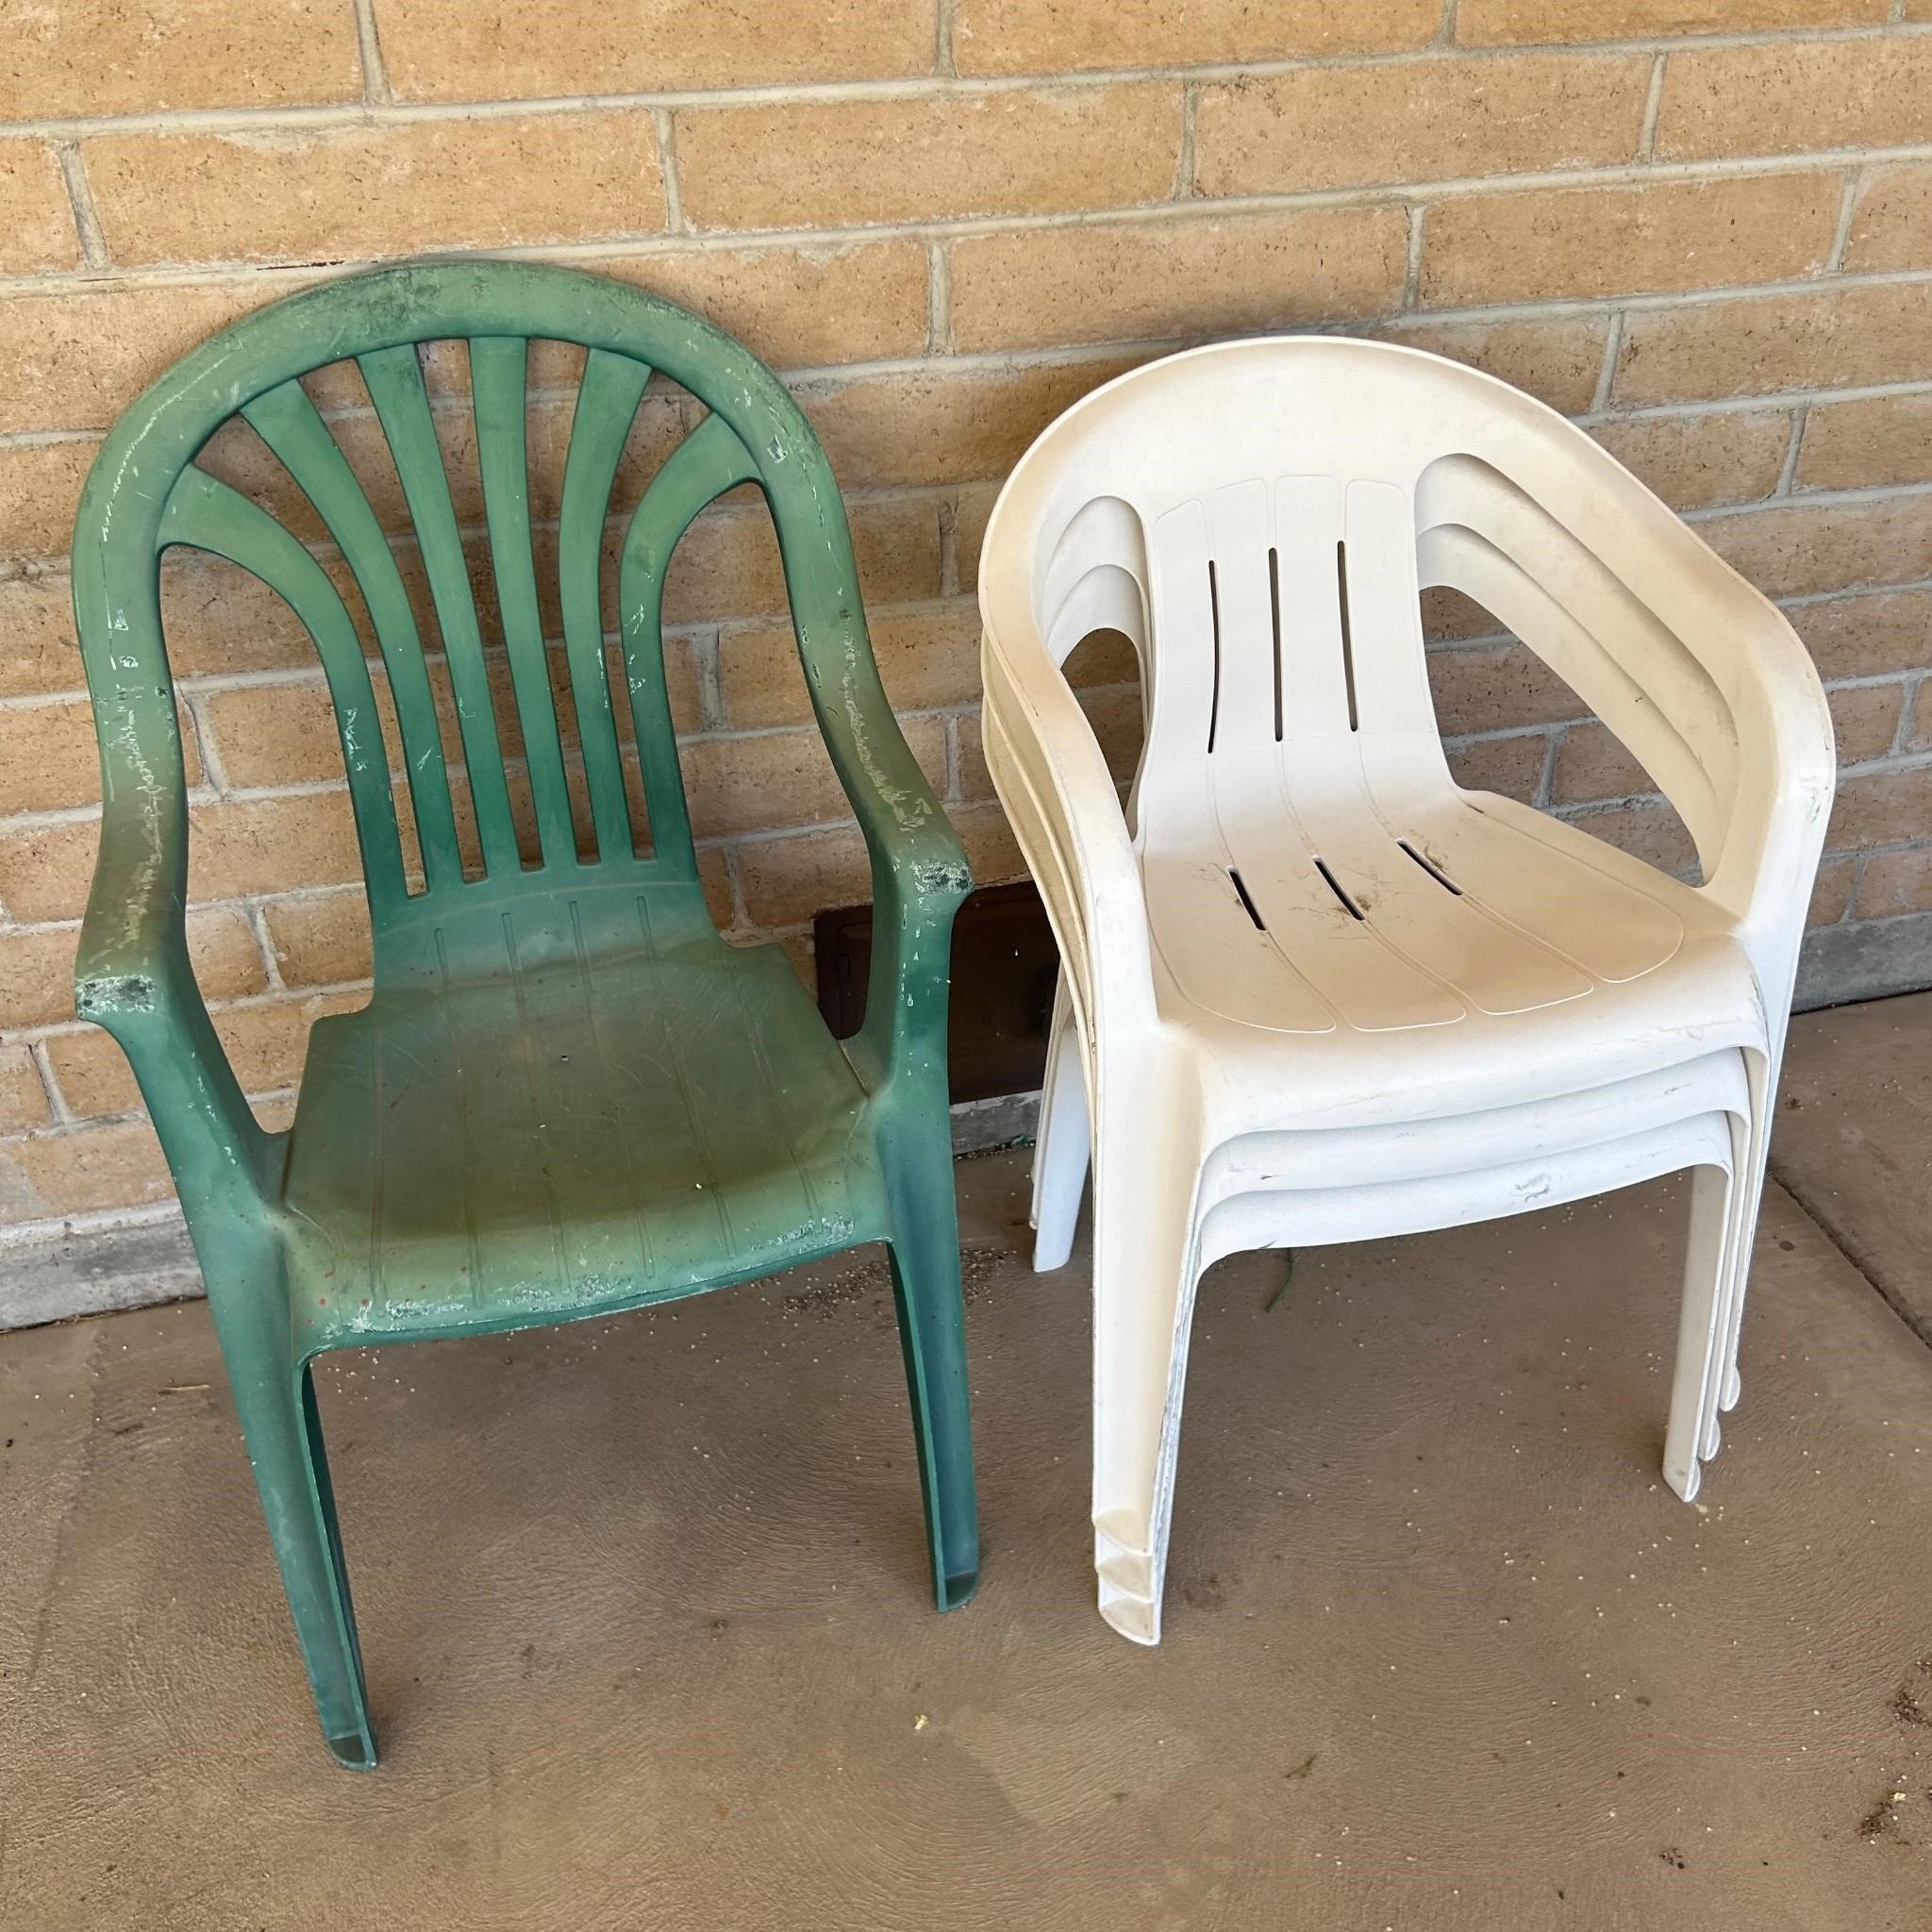 Plastic Lawn Chairs